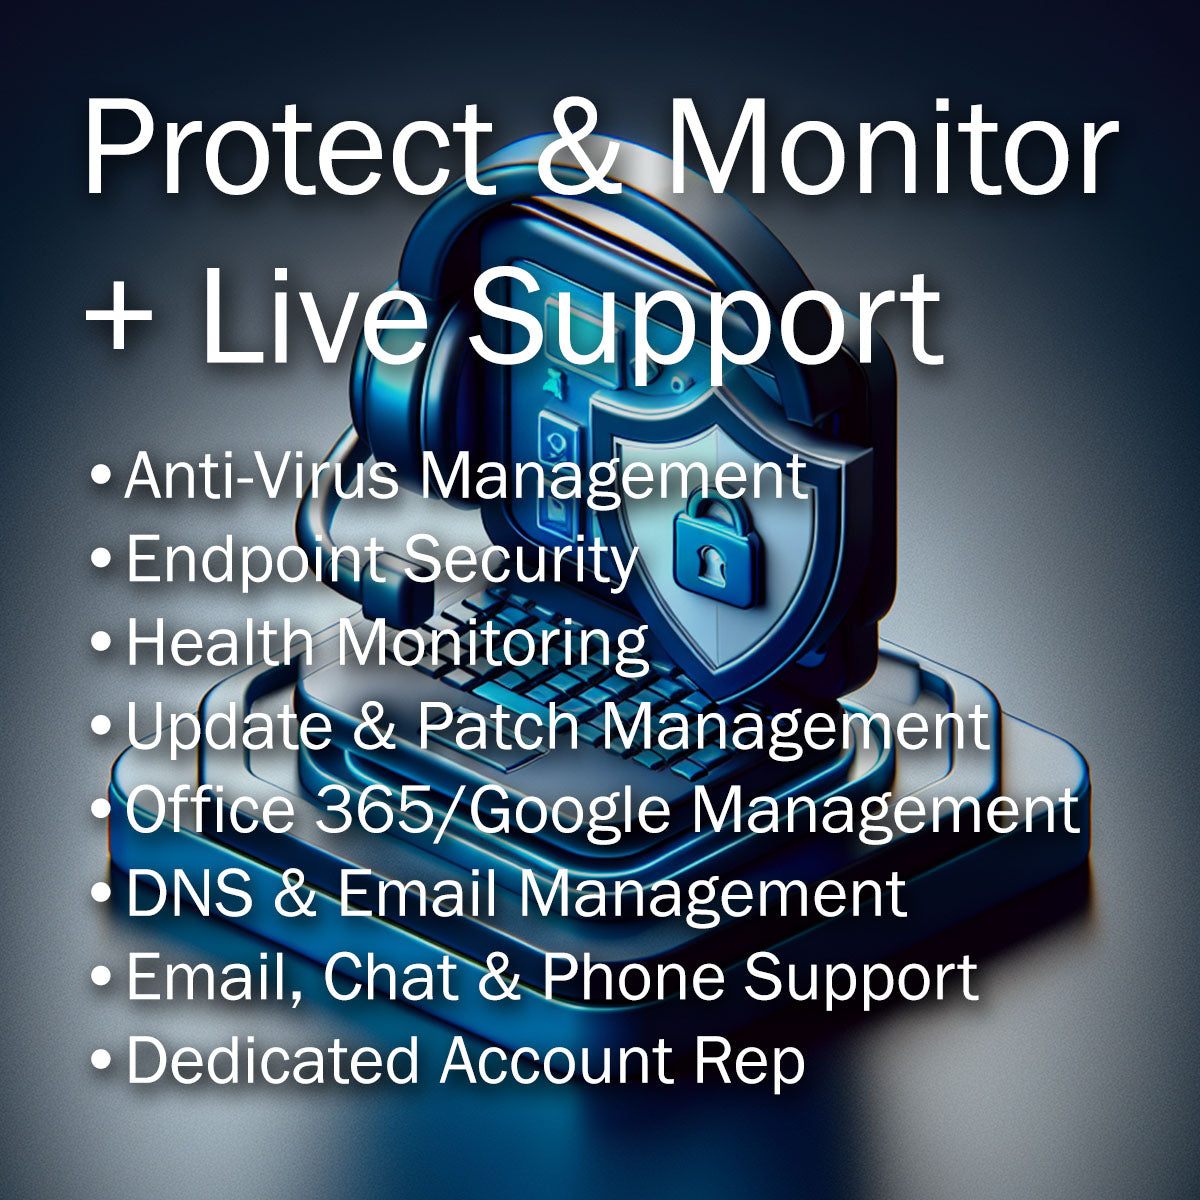 Pro Plan - Protect & Monitor + Live Support